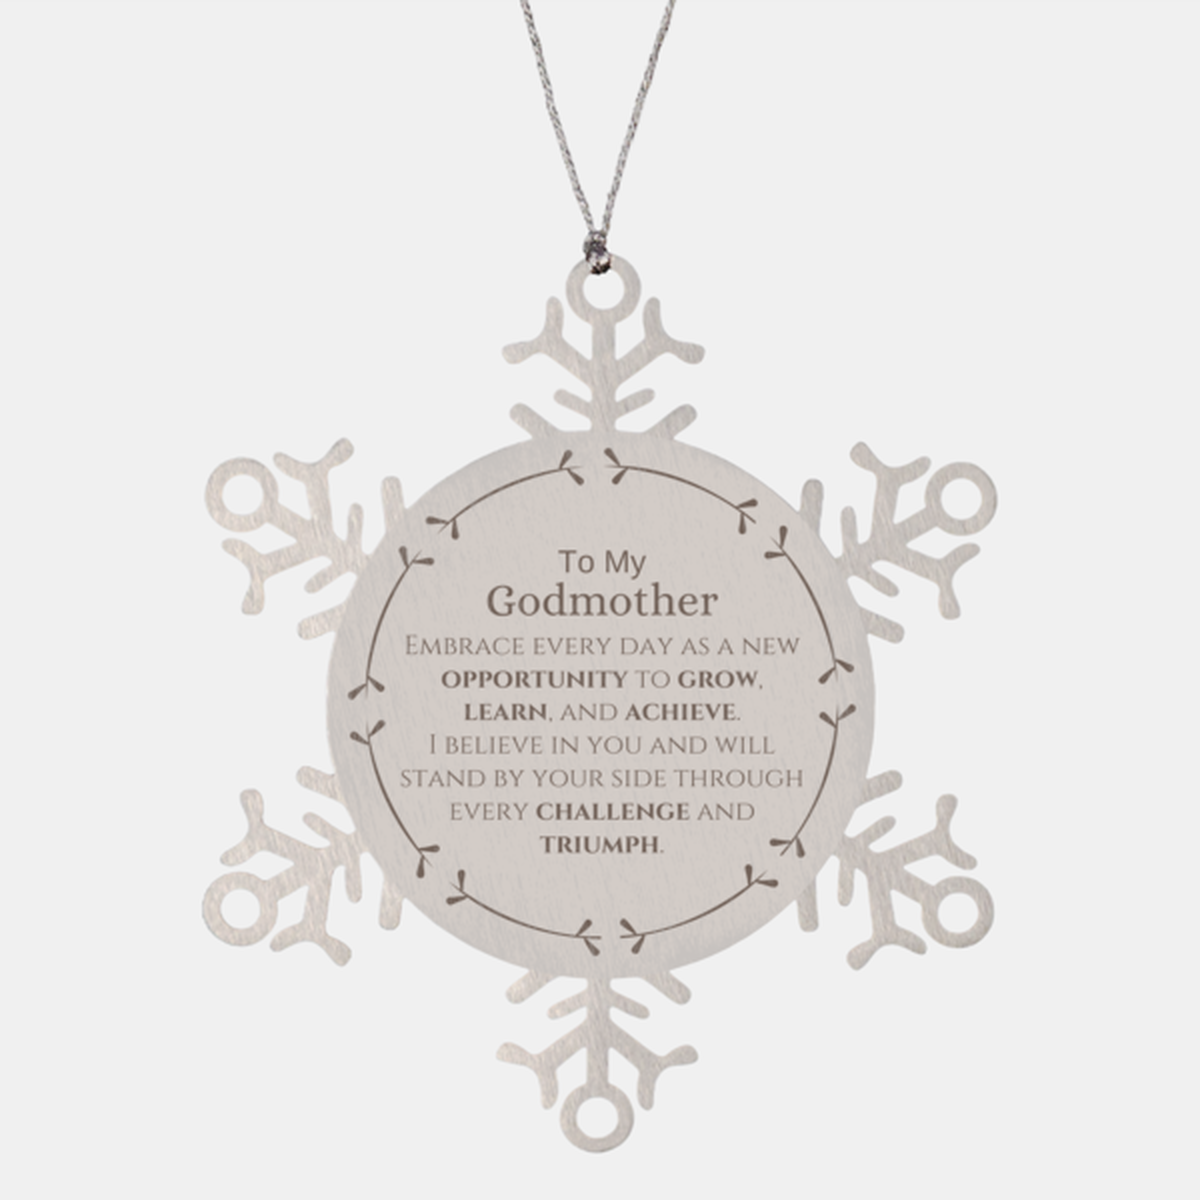 To My Godmother Gifts, I believe in you and will stand by your side, Inspirational Snowflake Ornament For Godmother, Birthday Christmas Motivational Godmother Gifts